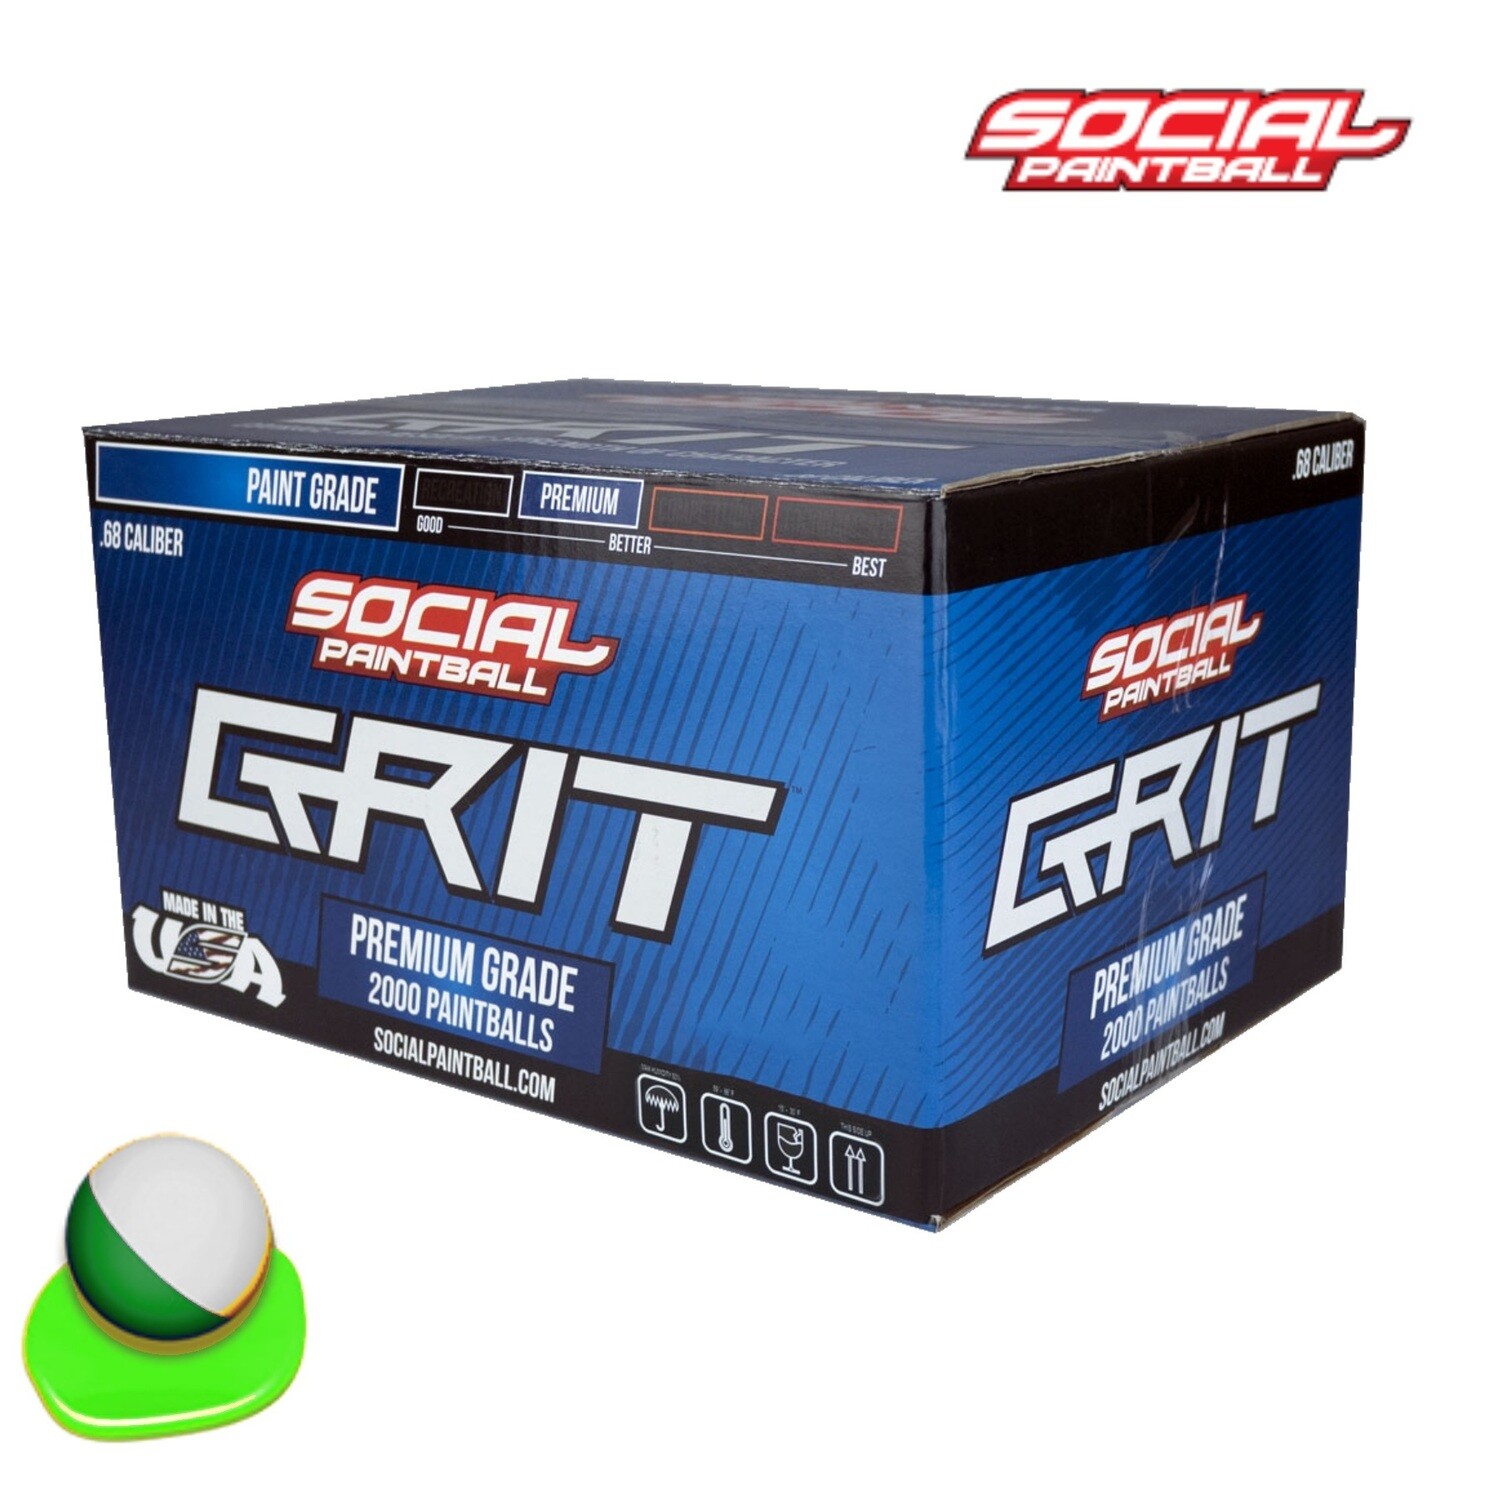 Social Paintball Grit .68 cal Paintballs - Case of 2000 Rds - Silver/Green Shell - Lime Green Fill